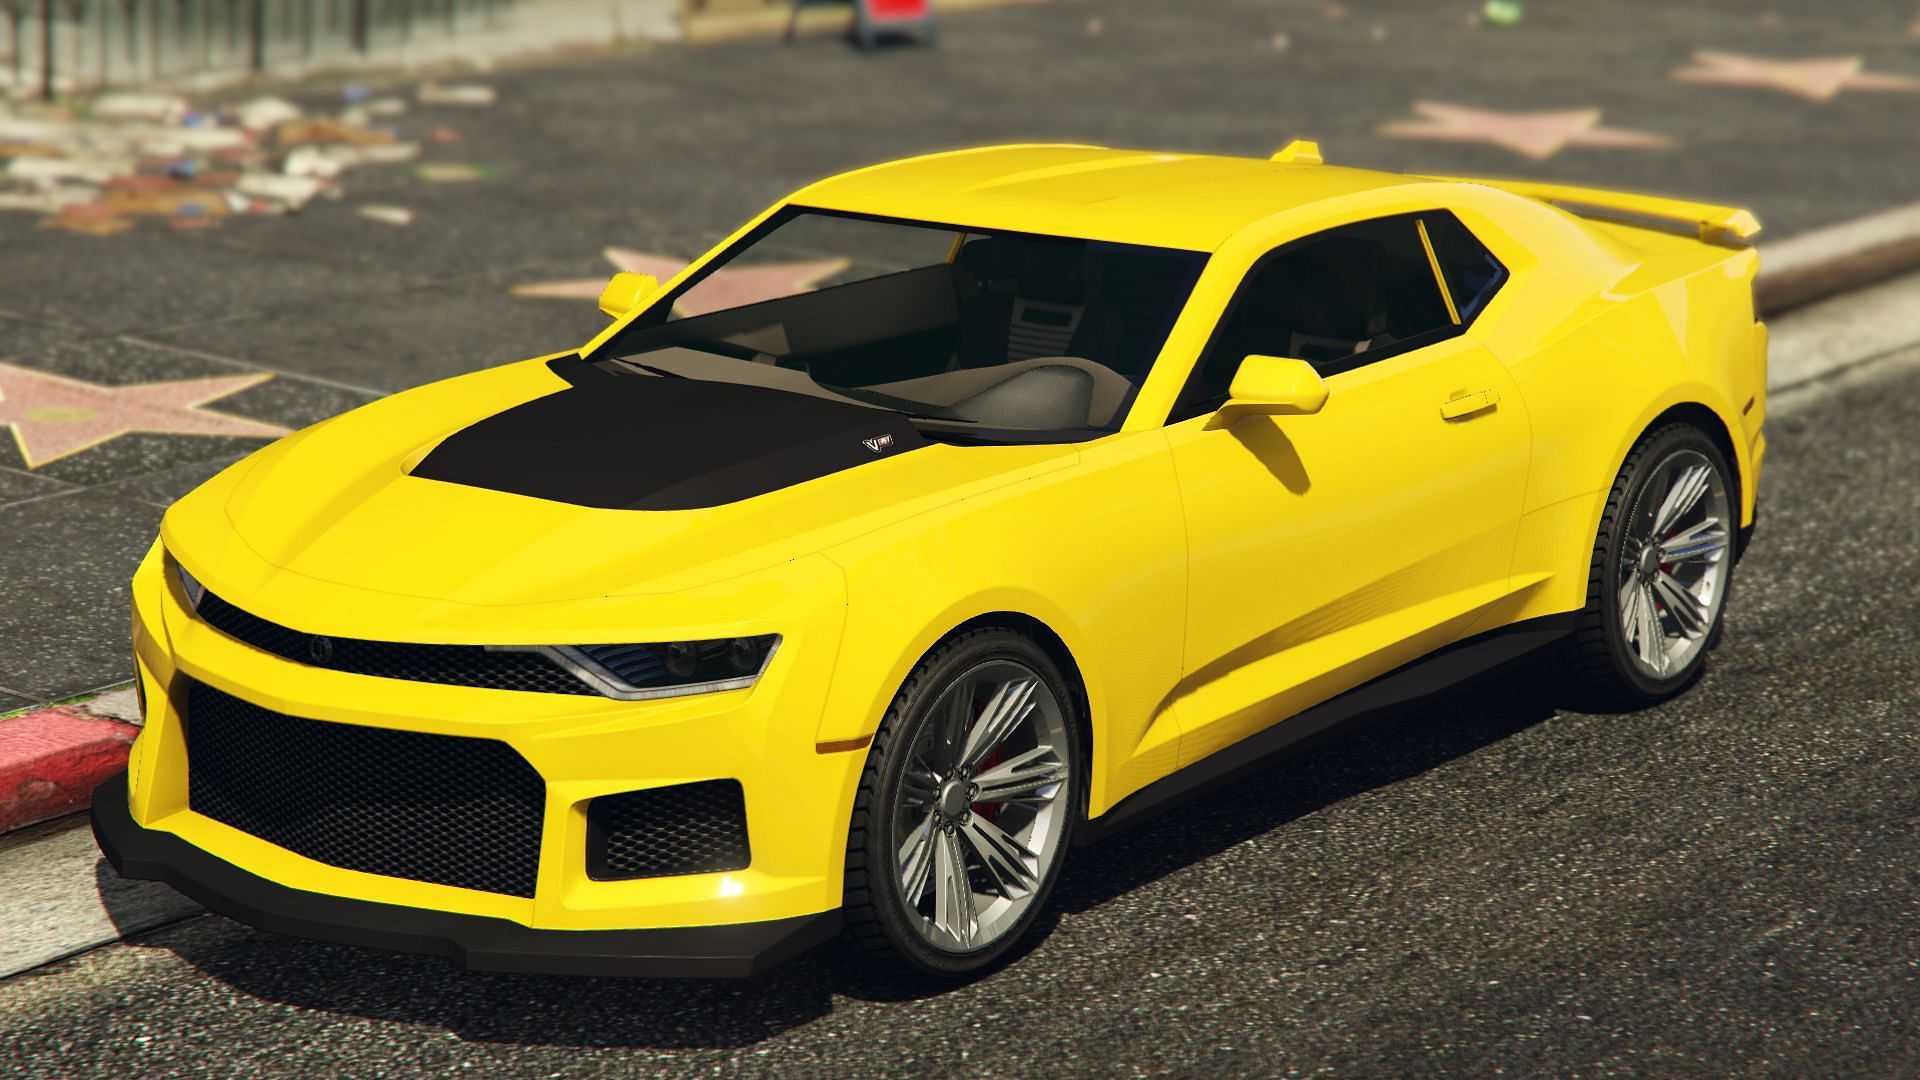 List of all HSW cars in GTA Online after The Last Dose update, ranked